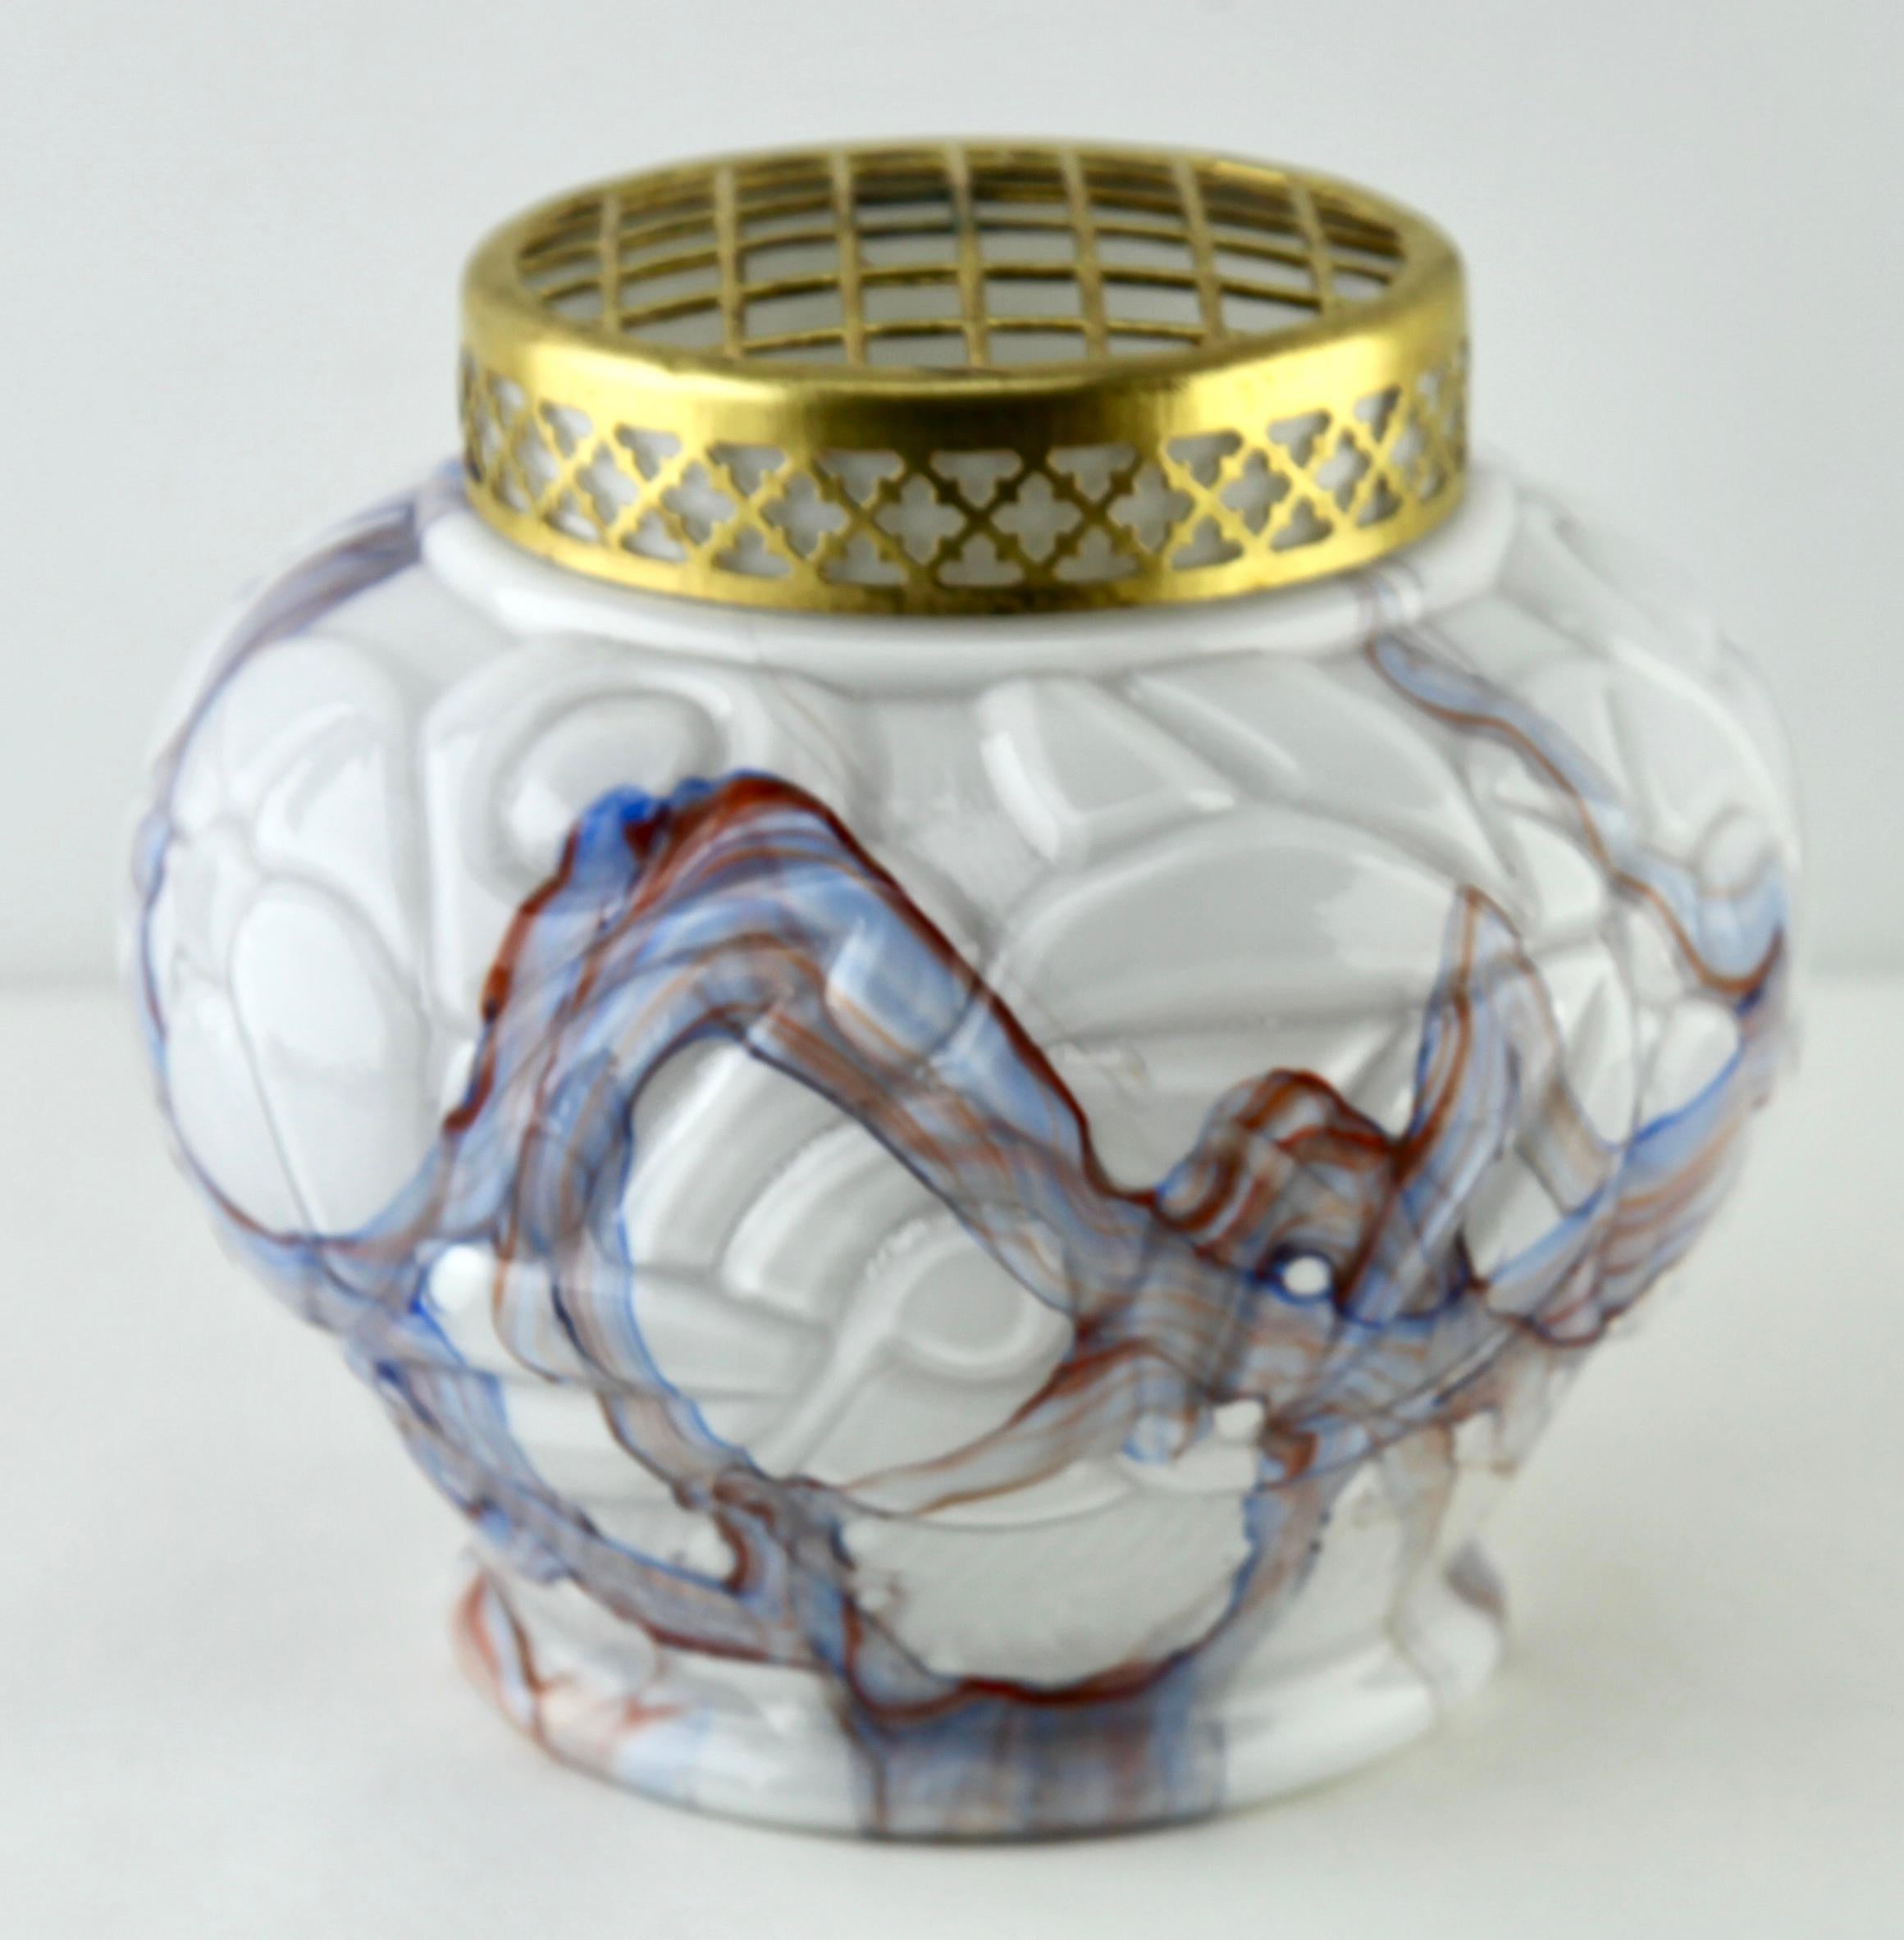 Hand-Crafted Art Deco Signed Scailmont HH Bouquetiers by Henri Heemskerk, 1886-1953 For Sale